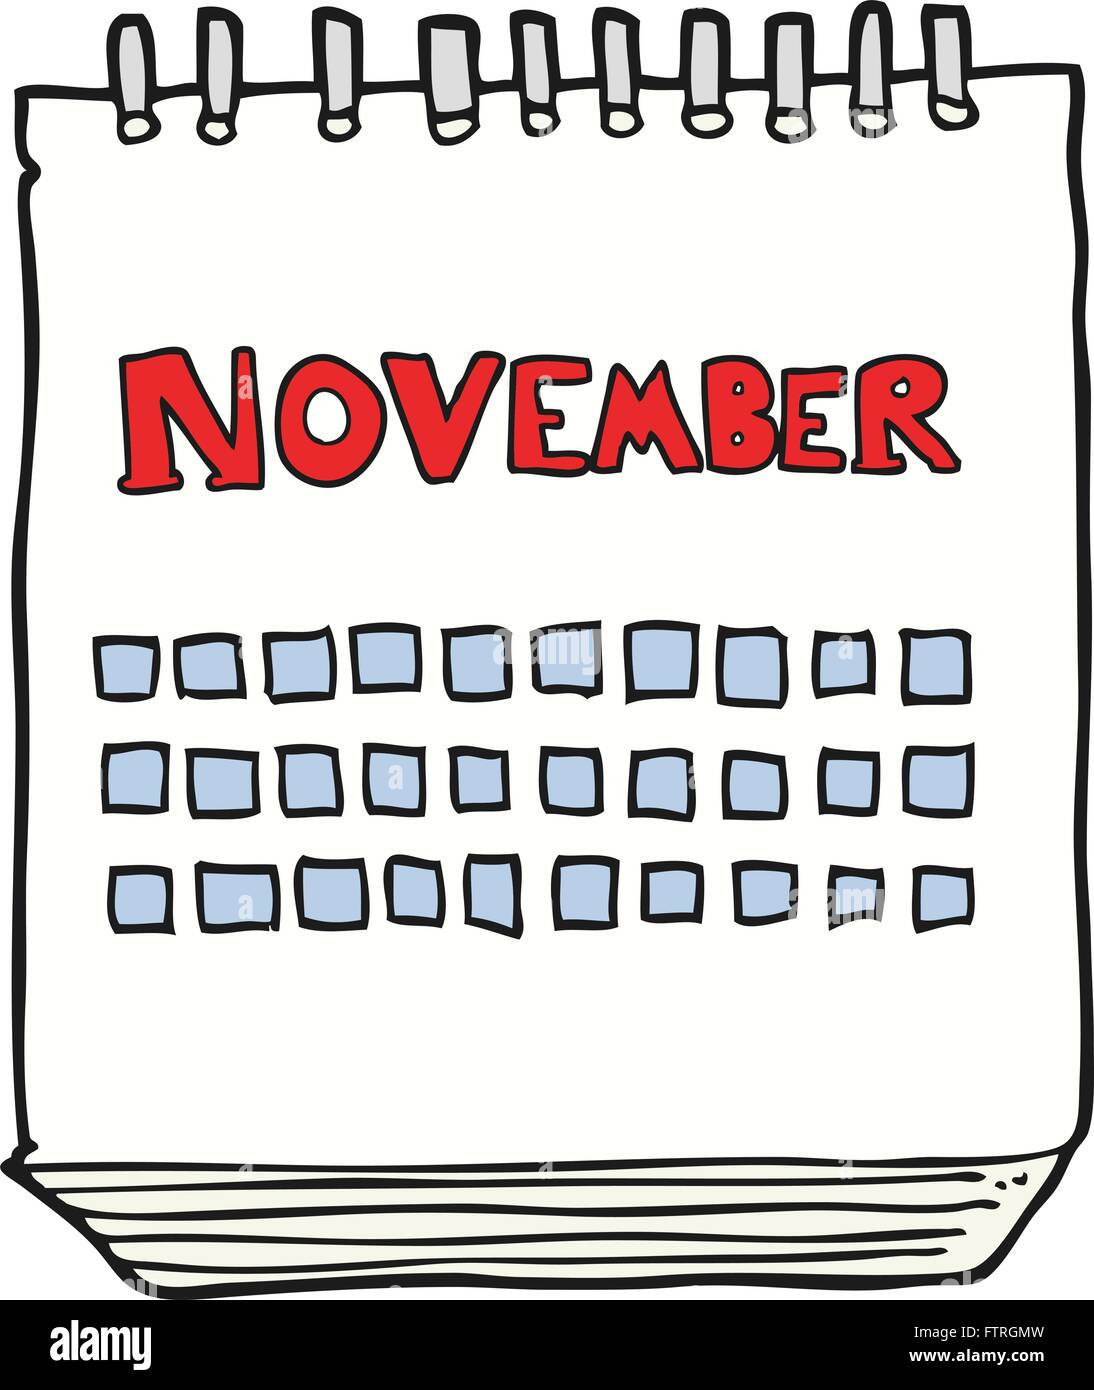 freehand drawn cartoon calendar showing month of november Stock Vector